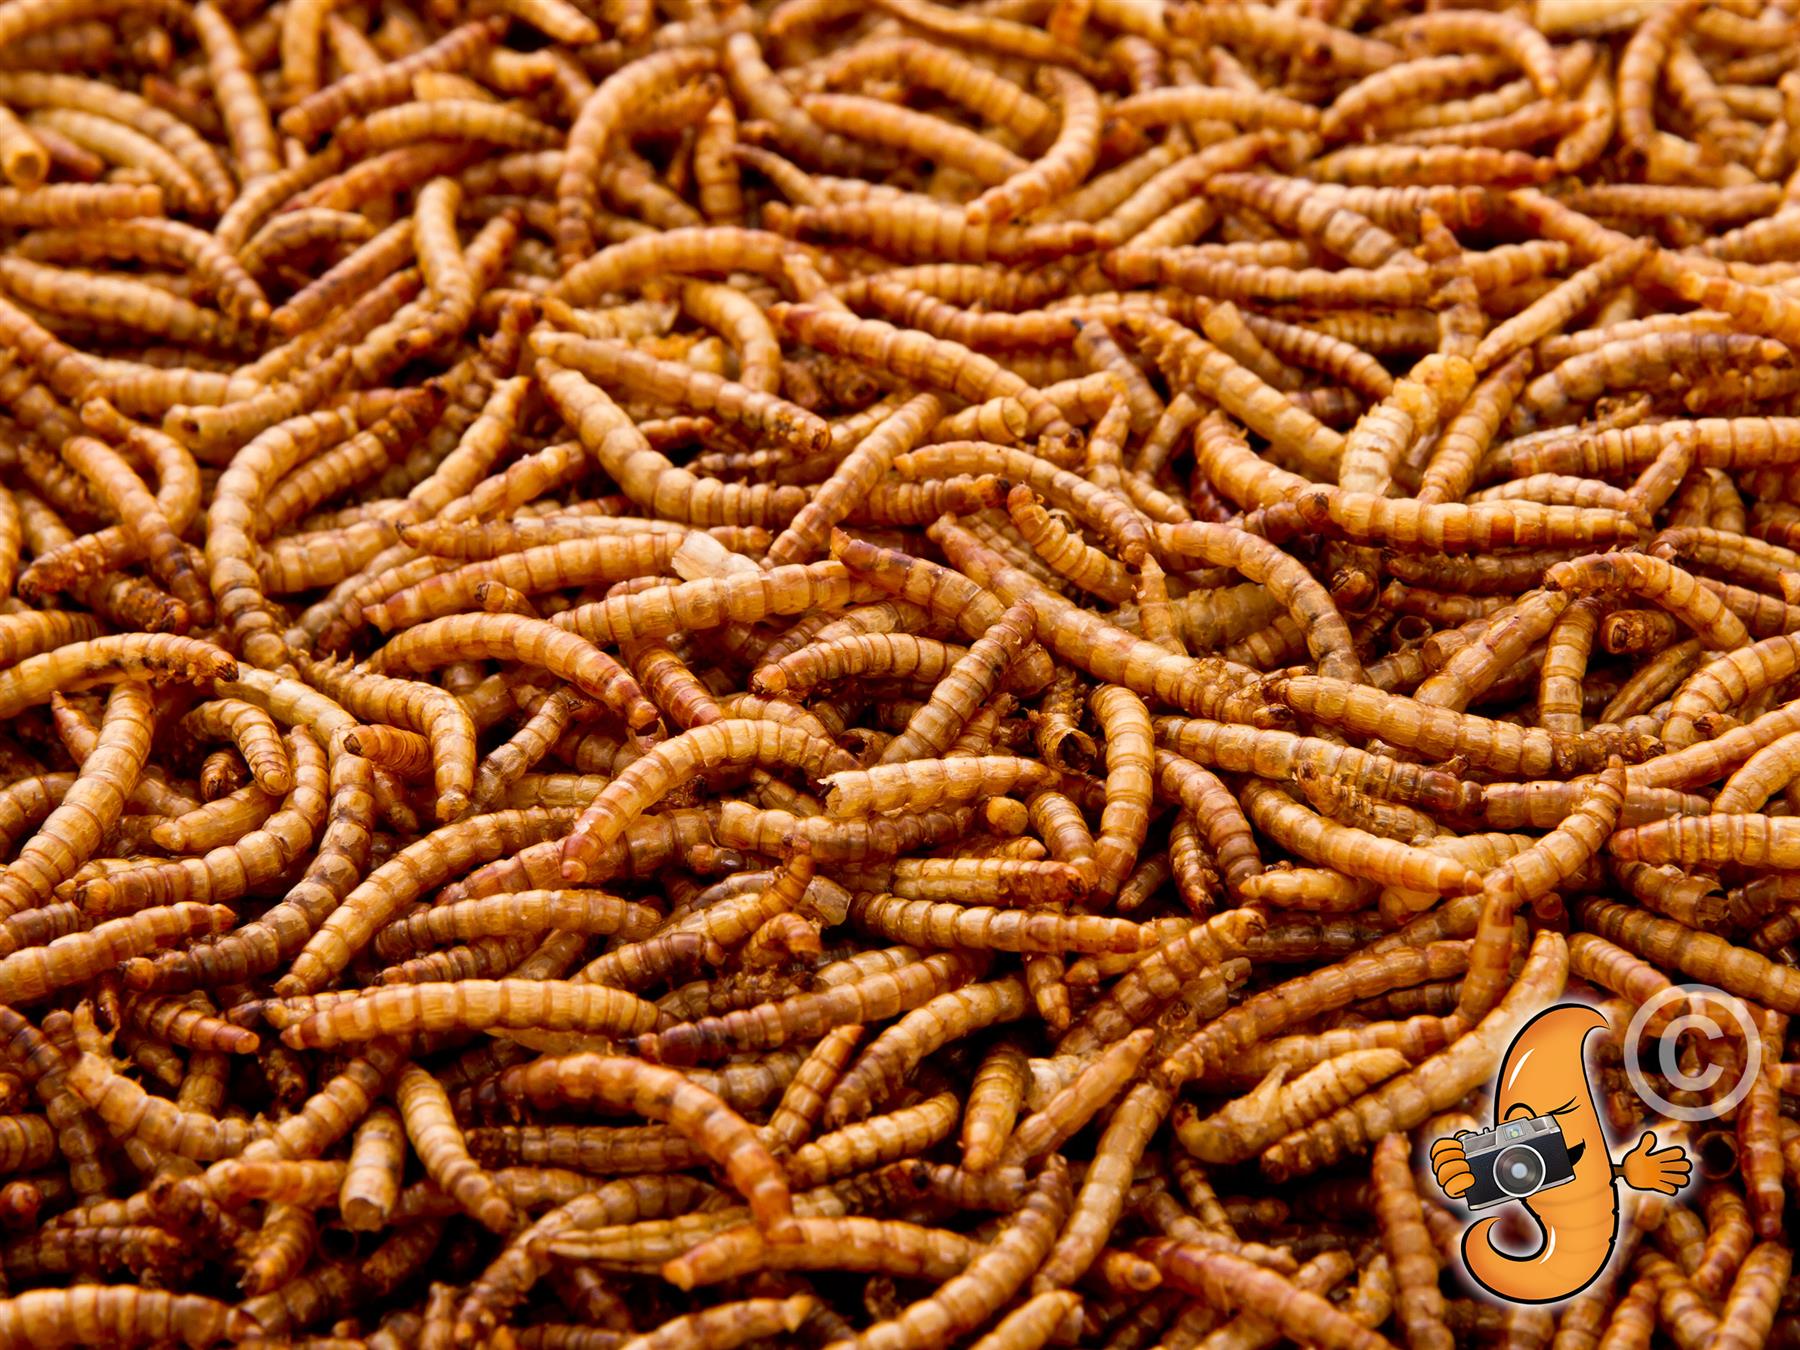 1Kg Canadian Grown Dried Mealworms